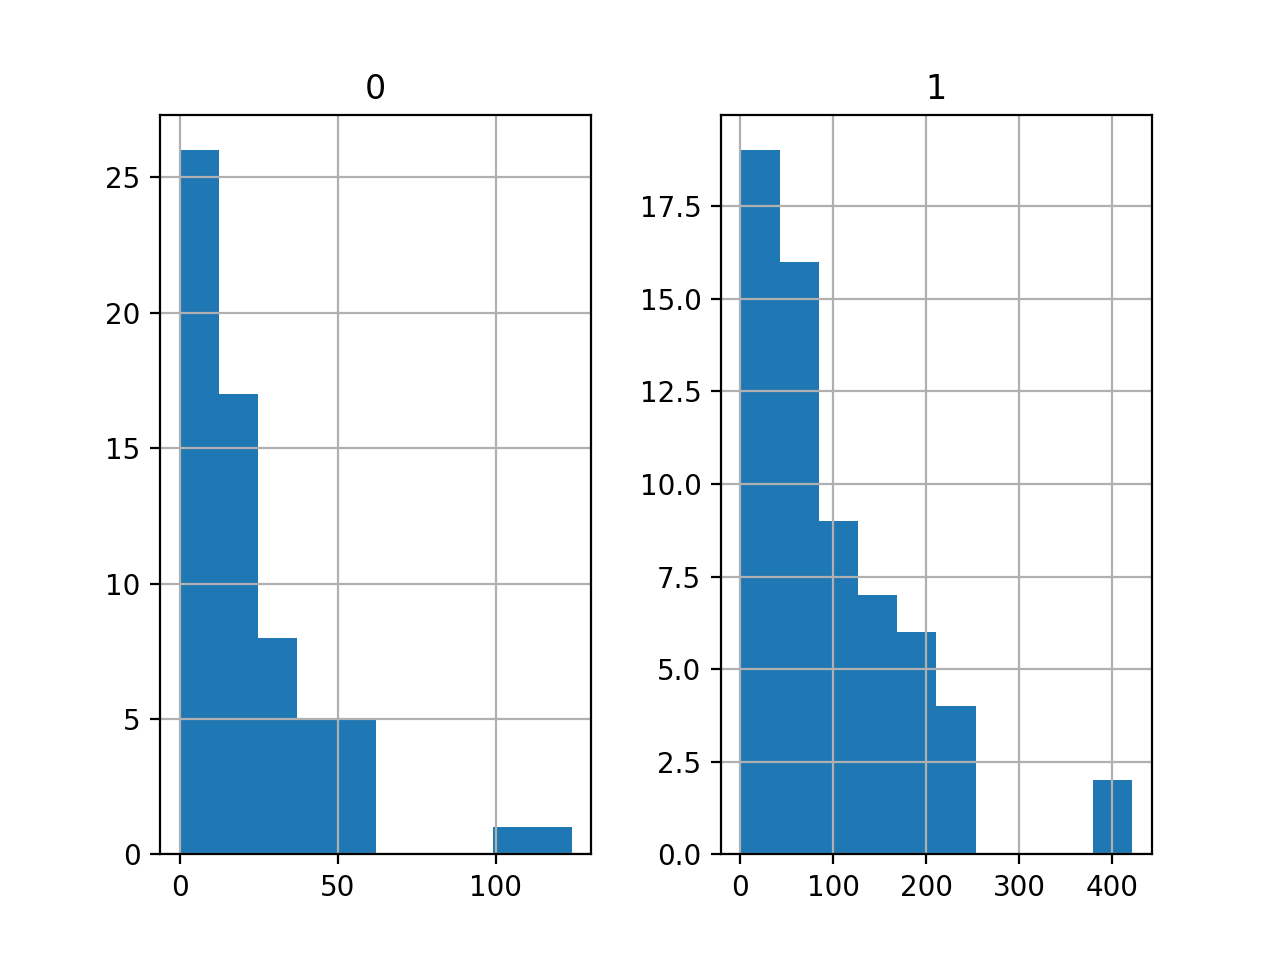 Histograms of the Auto Insurance Regression Dataset